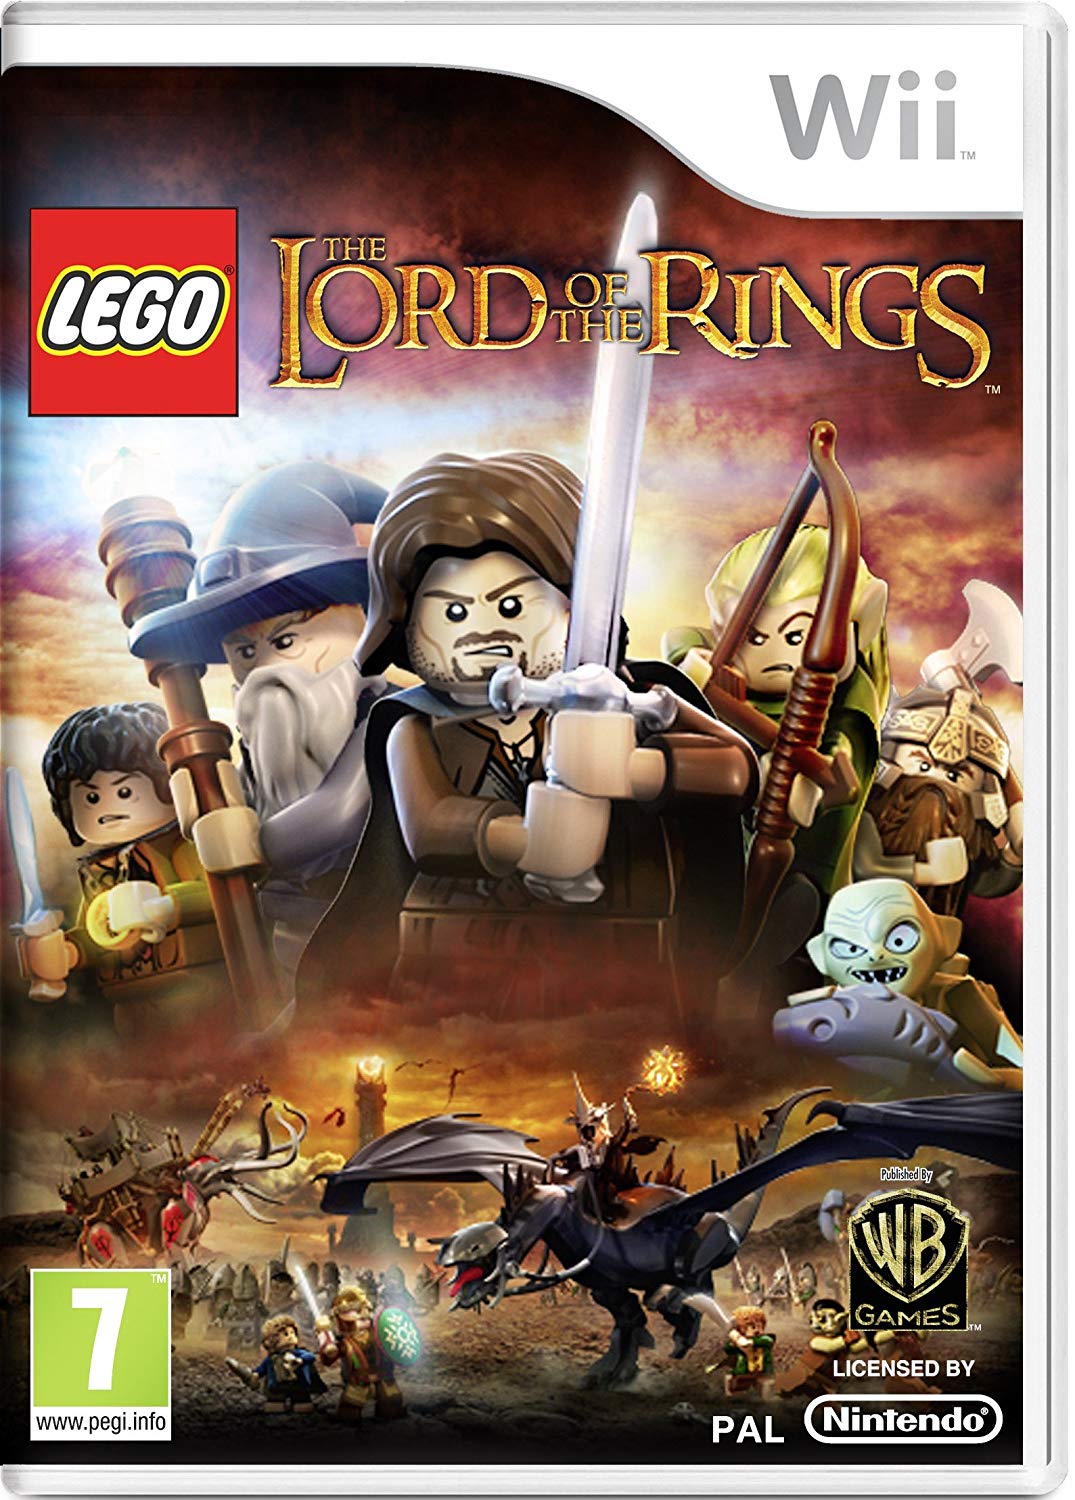 Lego The Lord of the Rings (NTSC)